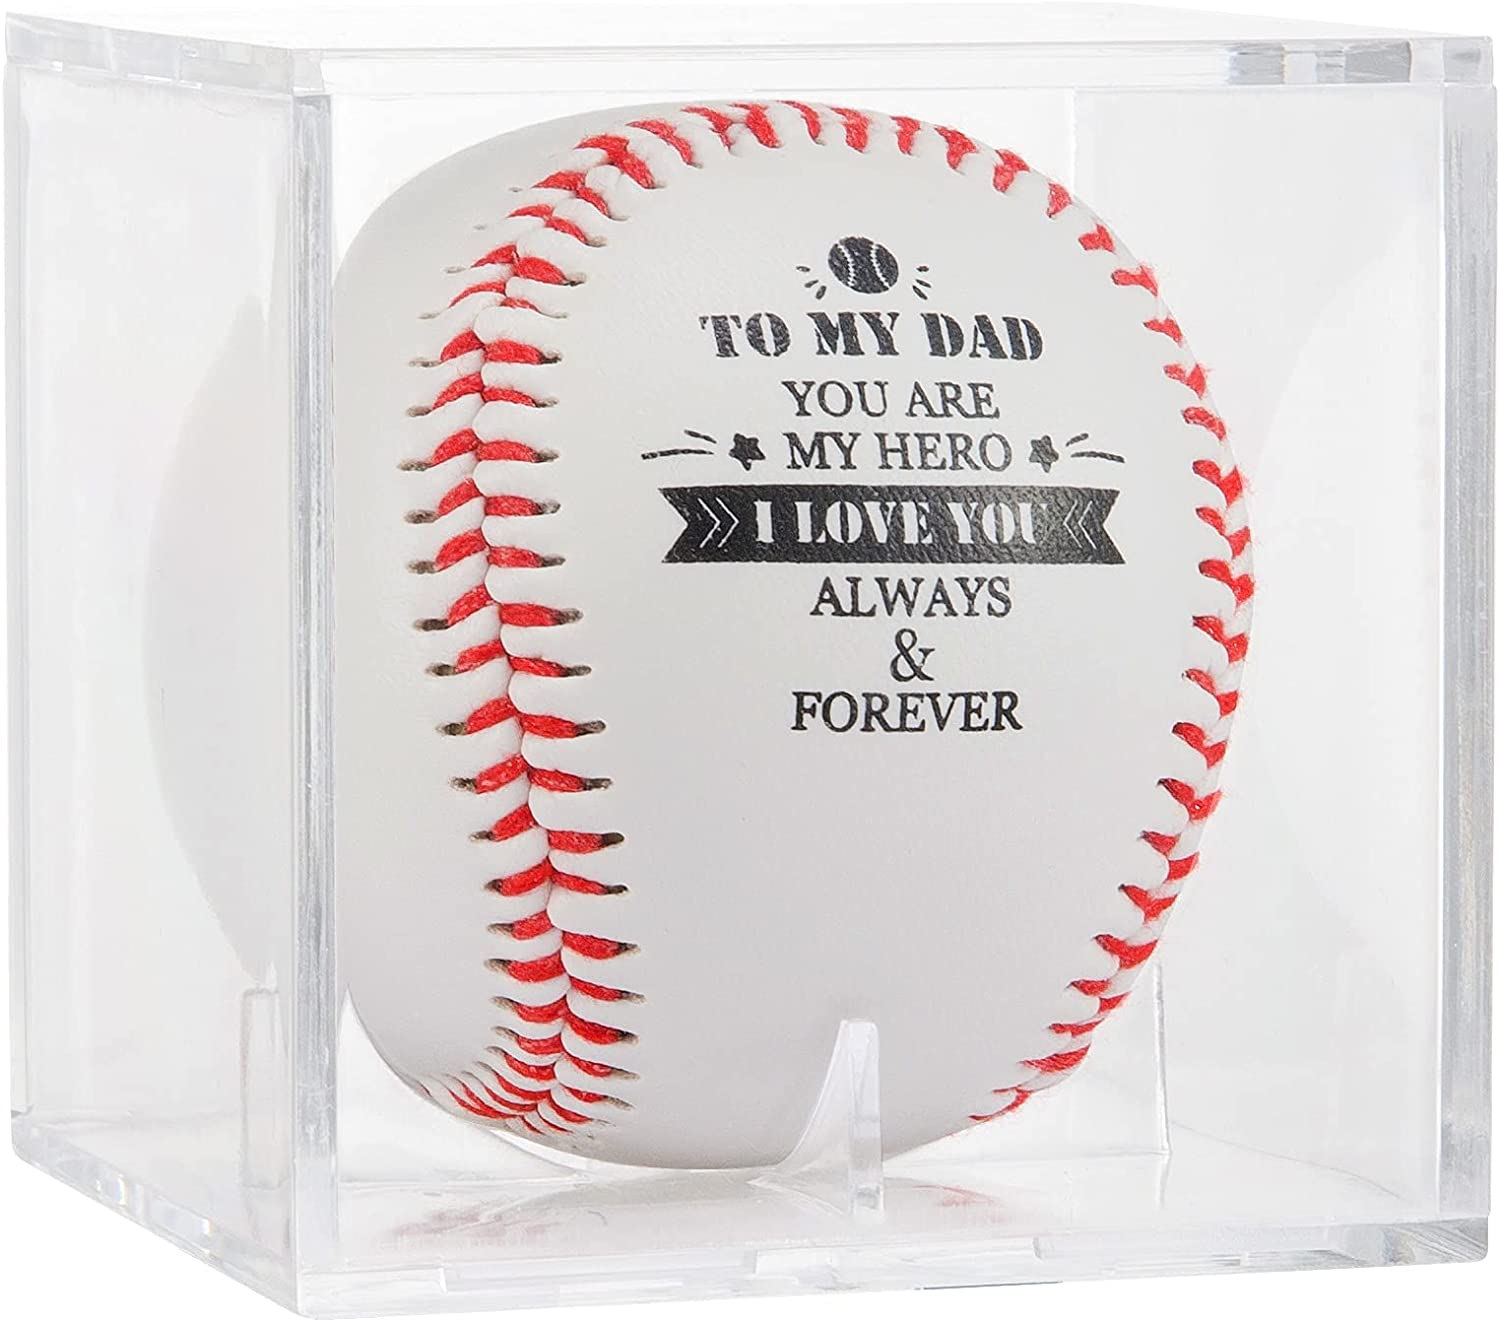 11 Home Runs Ideas! Helping You Finding the Perfect Baseball Father's Day Gift